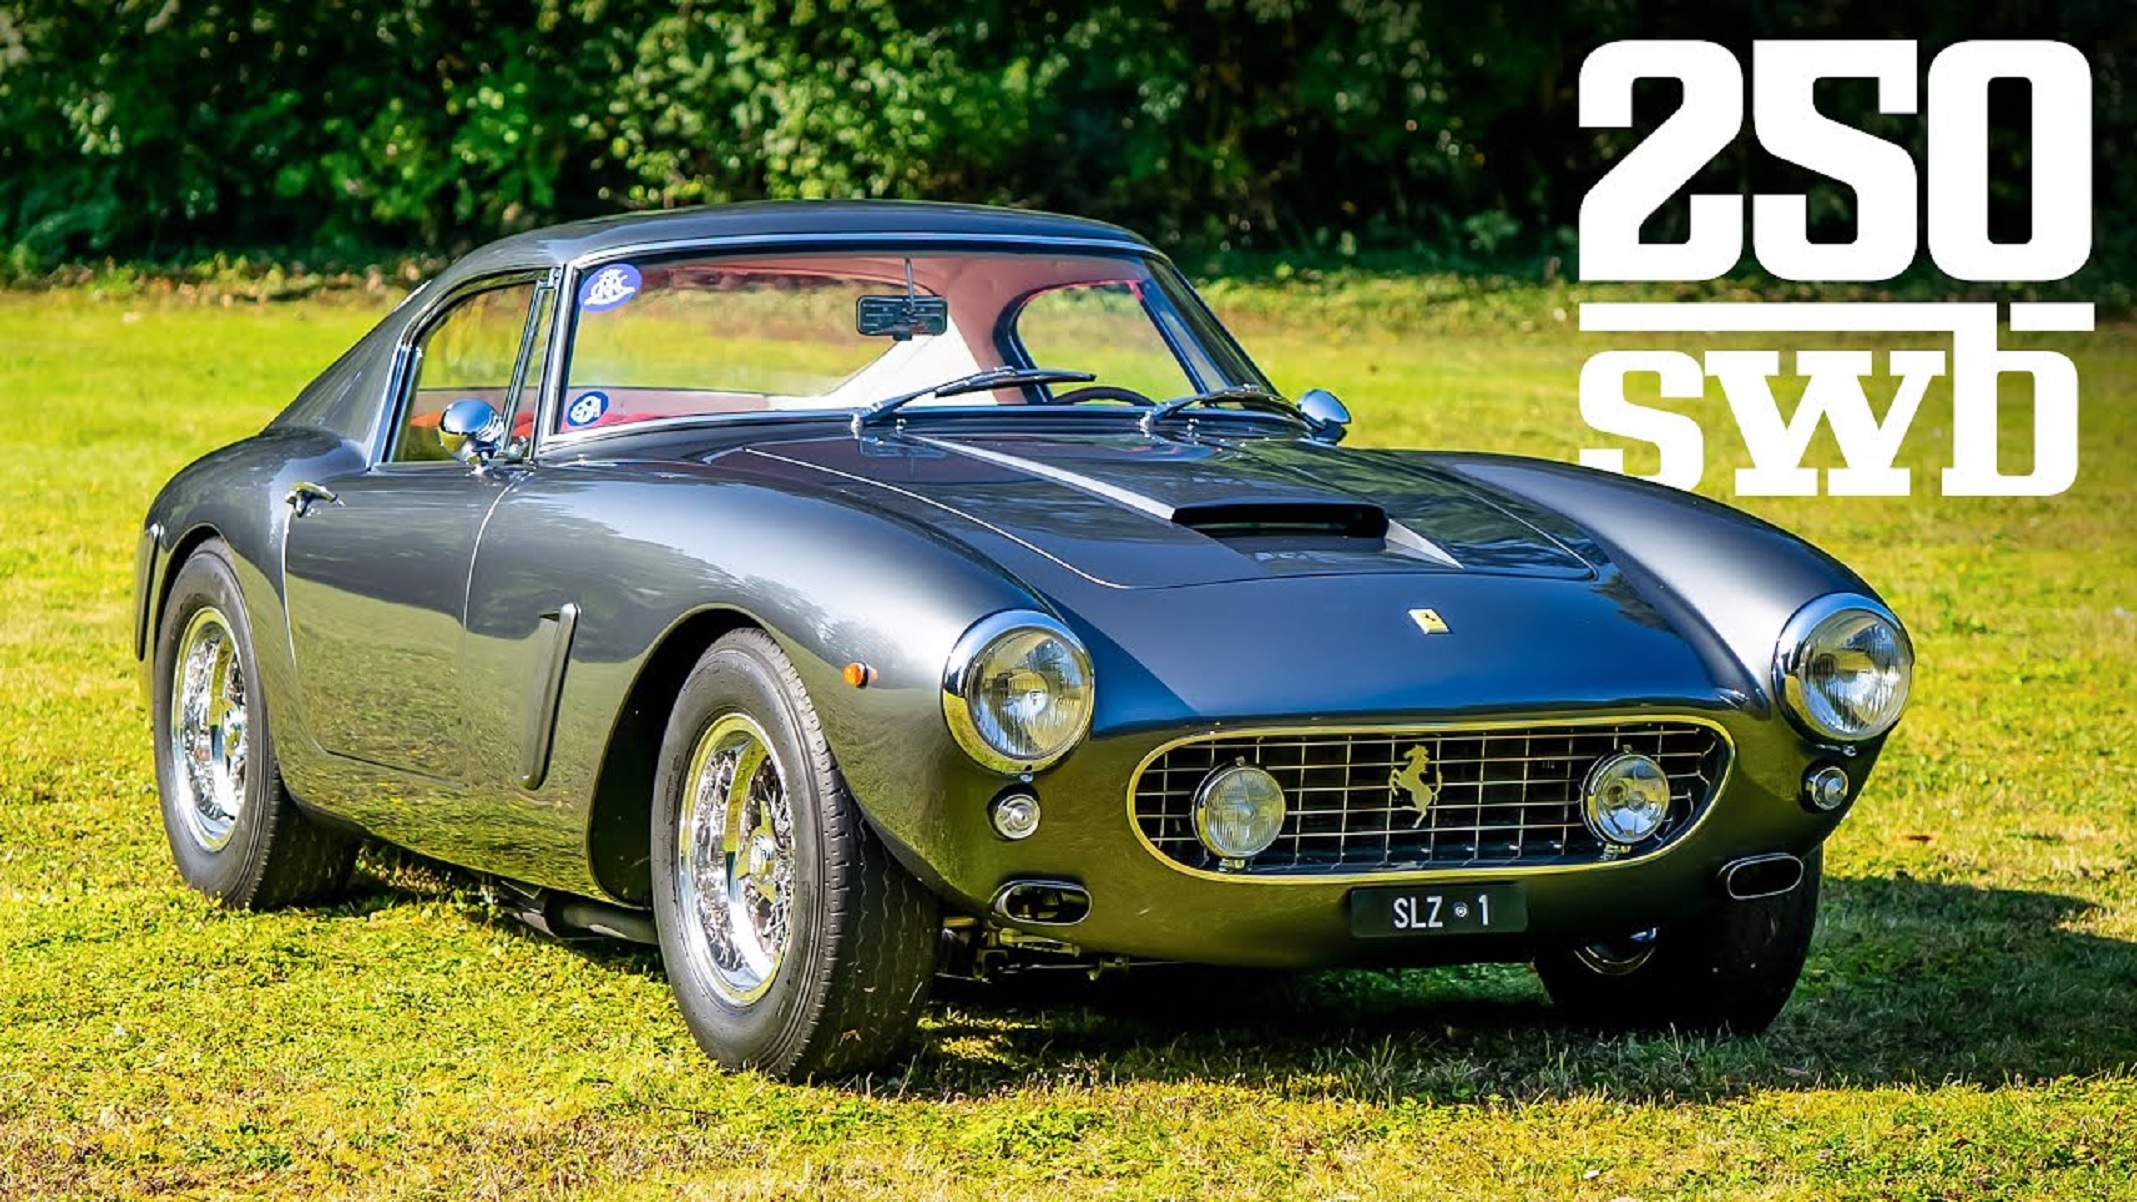 A silver GTO Engineering Ferrari 250 GT SWB Revival parked on a lawn